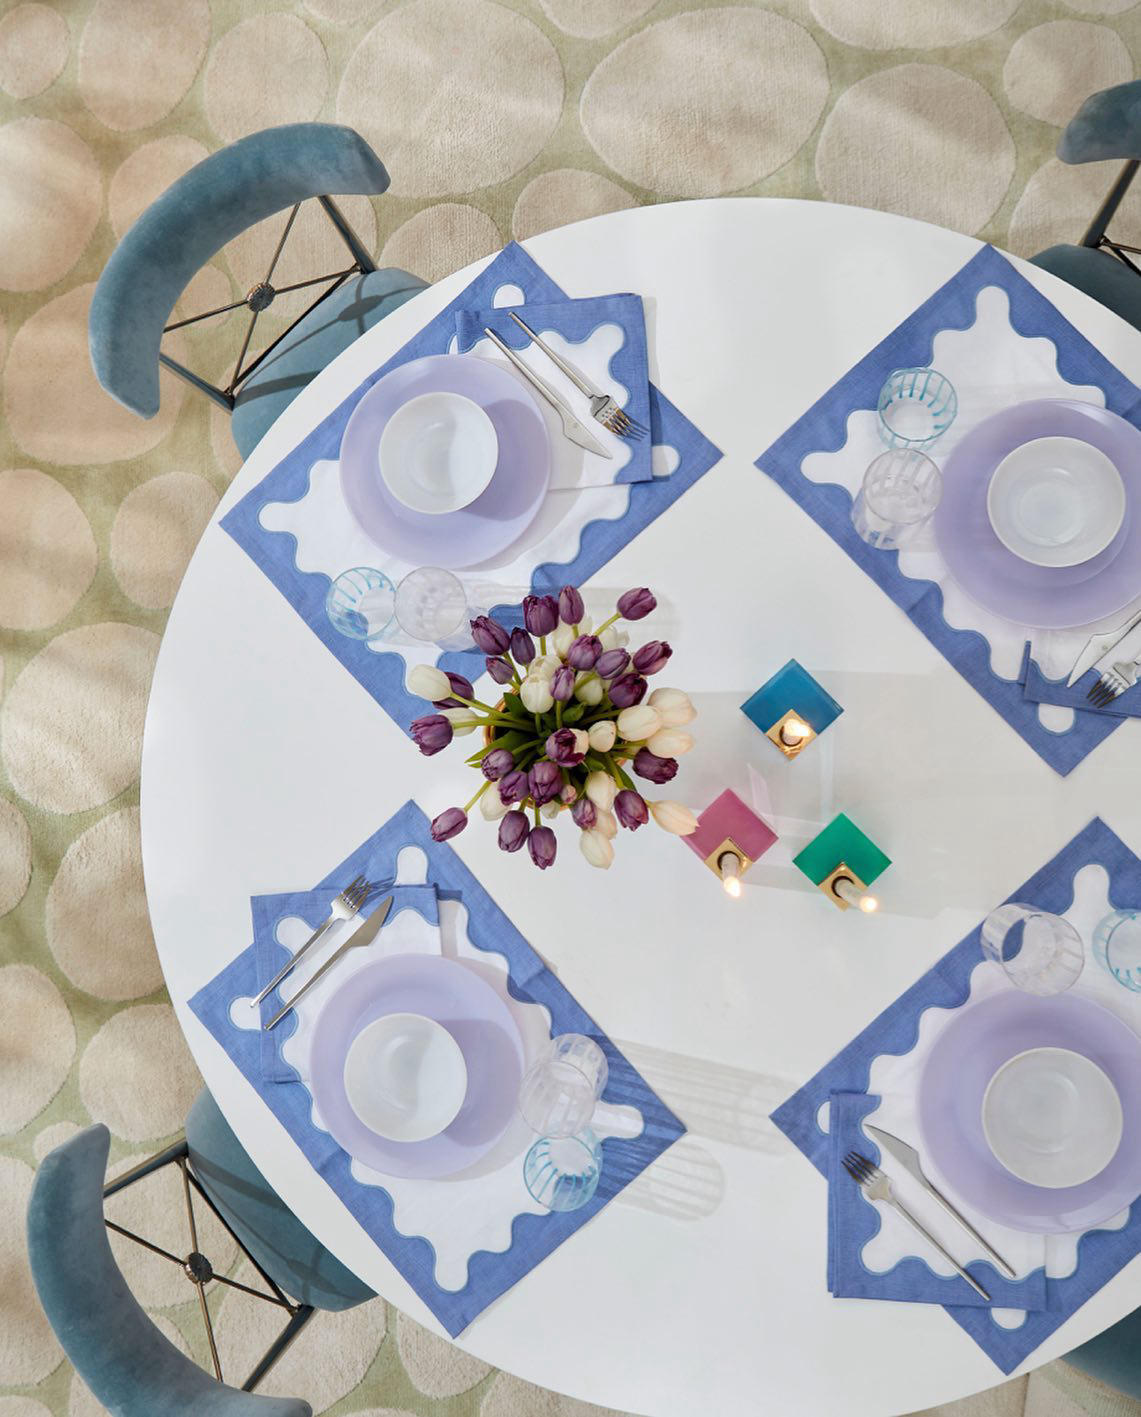 Jonathan Adler - Make waves at your next dinner party with our Ripple Placemat